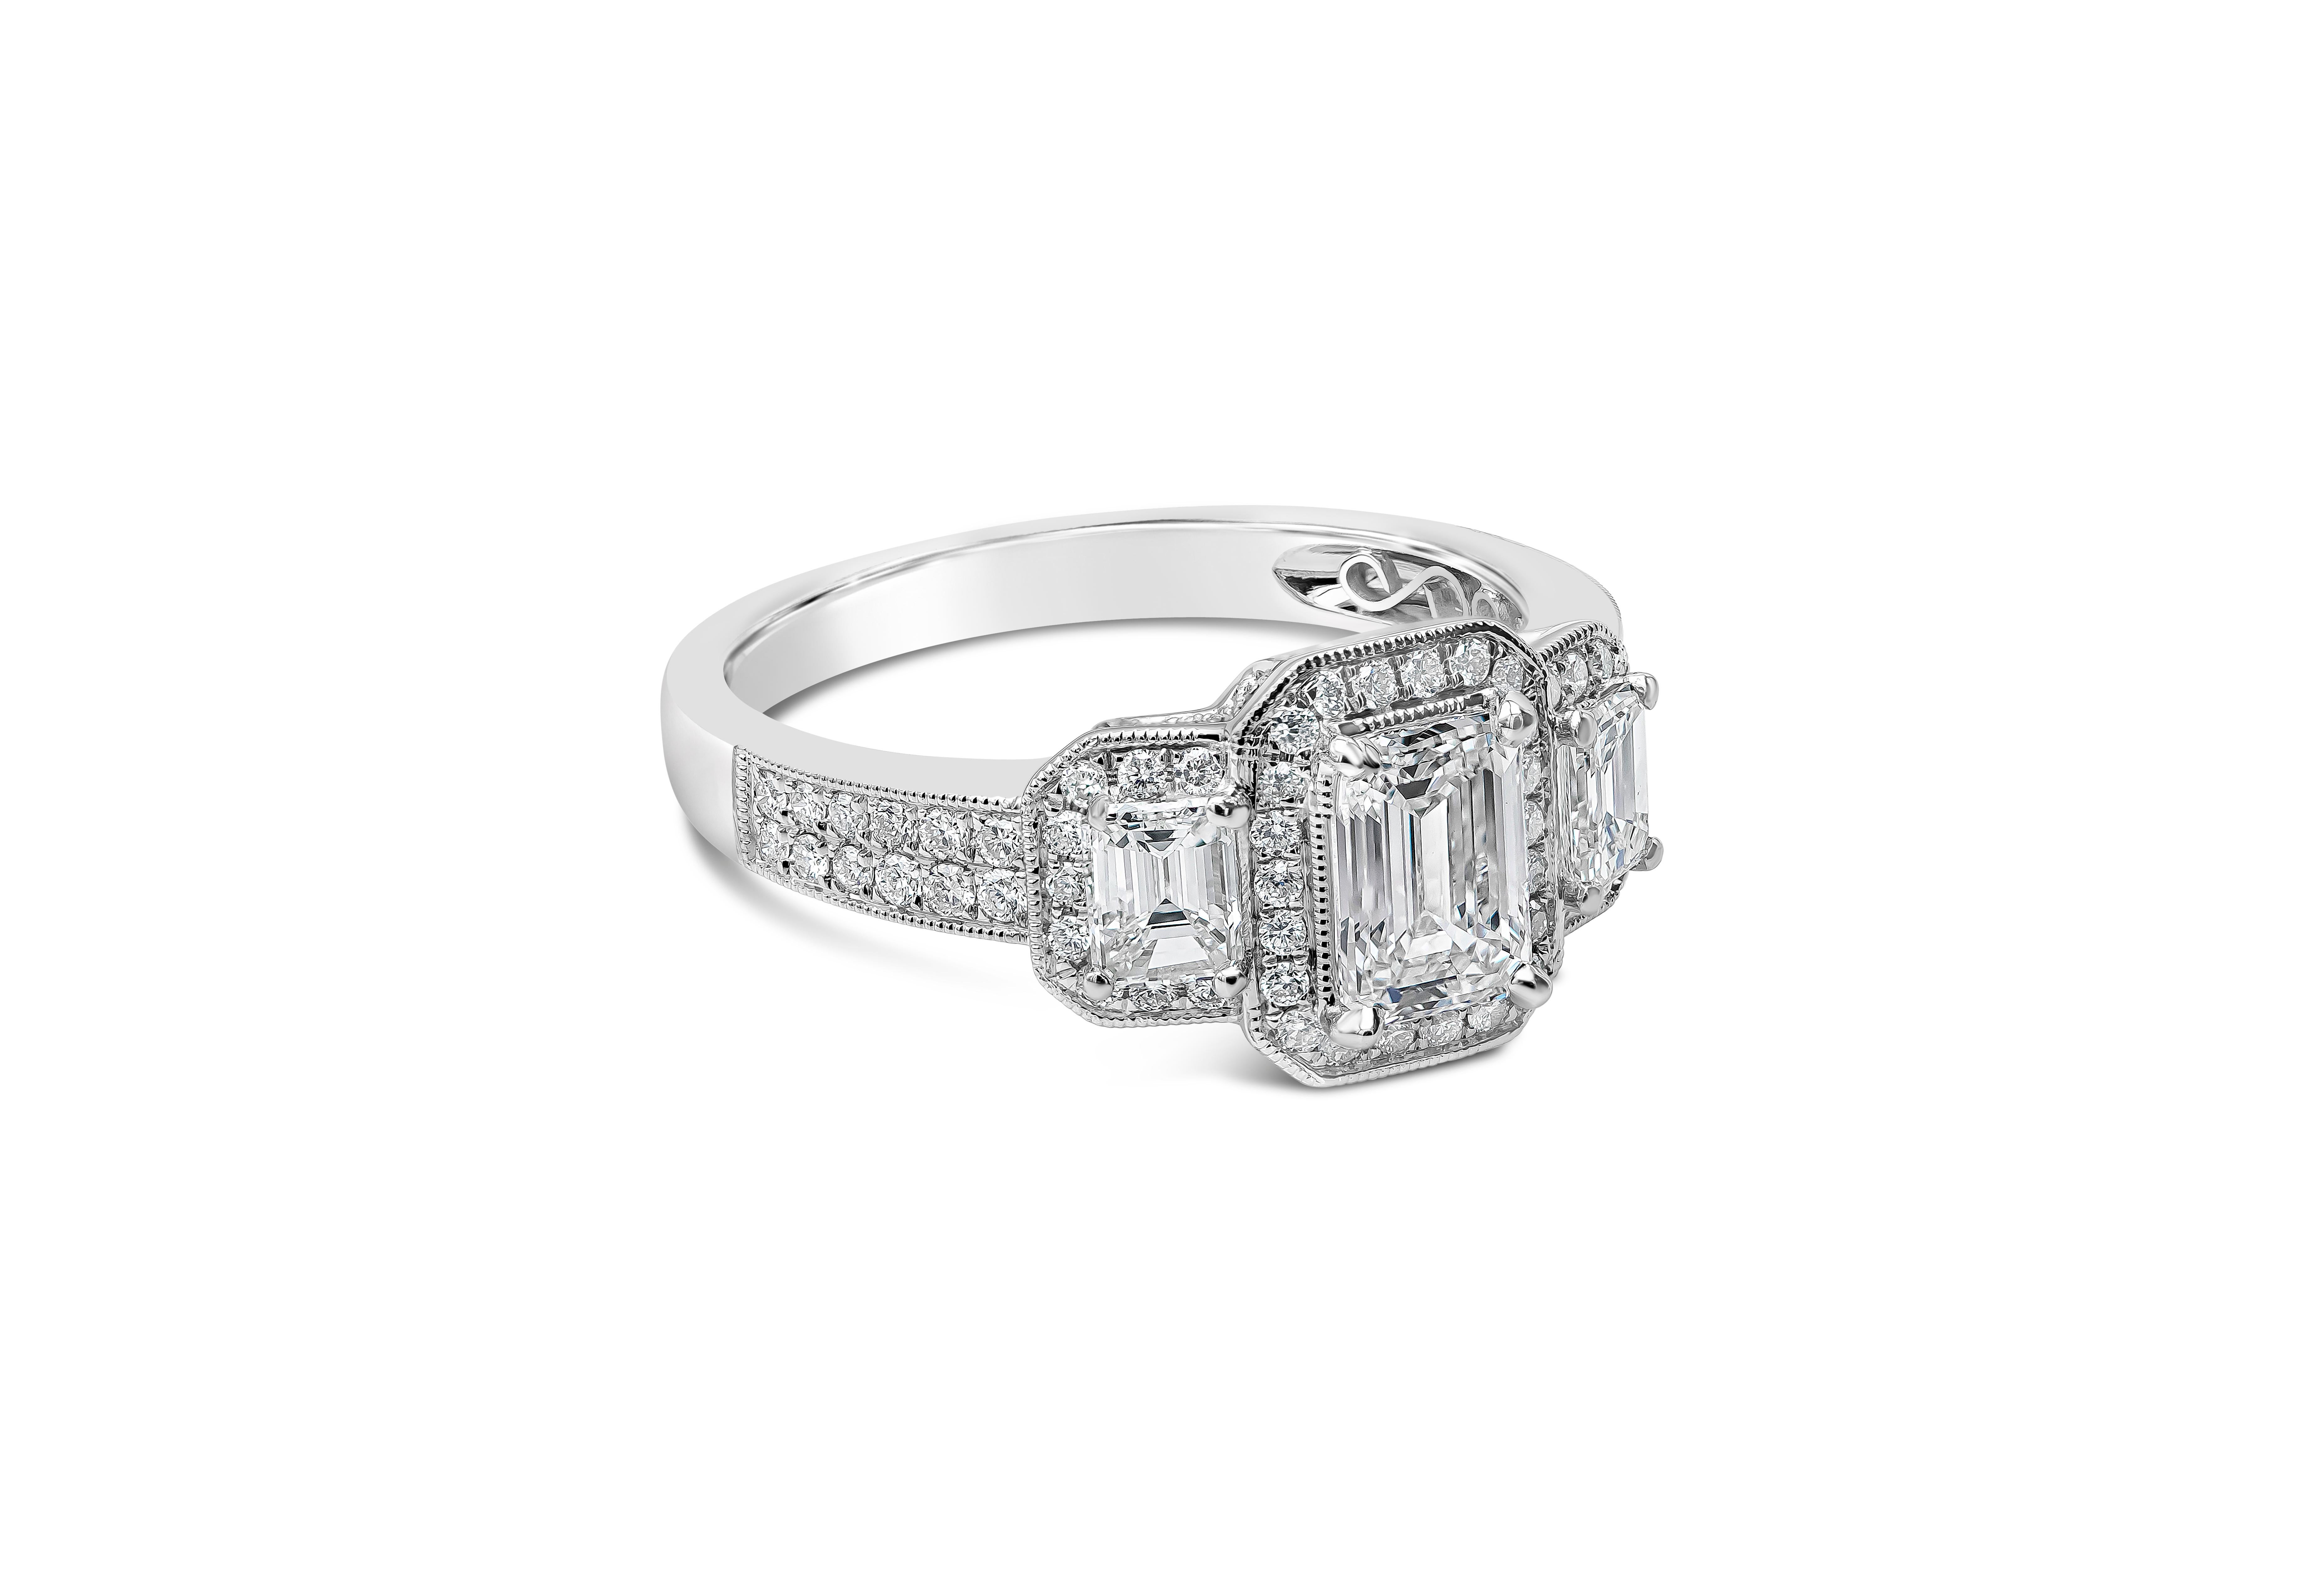 An antique-style engagement ring showcasing a 0.75 carats emerald cut diamond certified by GIA as H color, VVS1 in clarity. Flanking the center diamond are two emerald cut diamonds set in a round brilliant diamond halo. Accent diamonds weigh 0.78